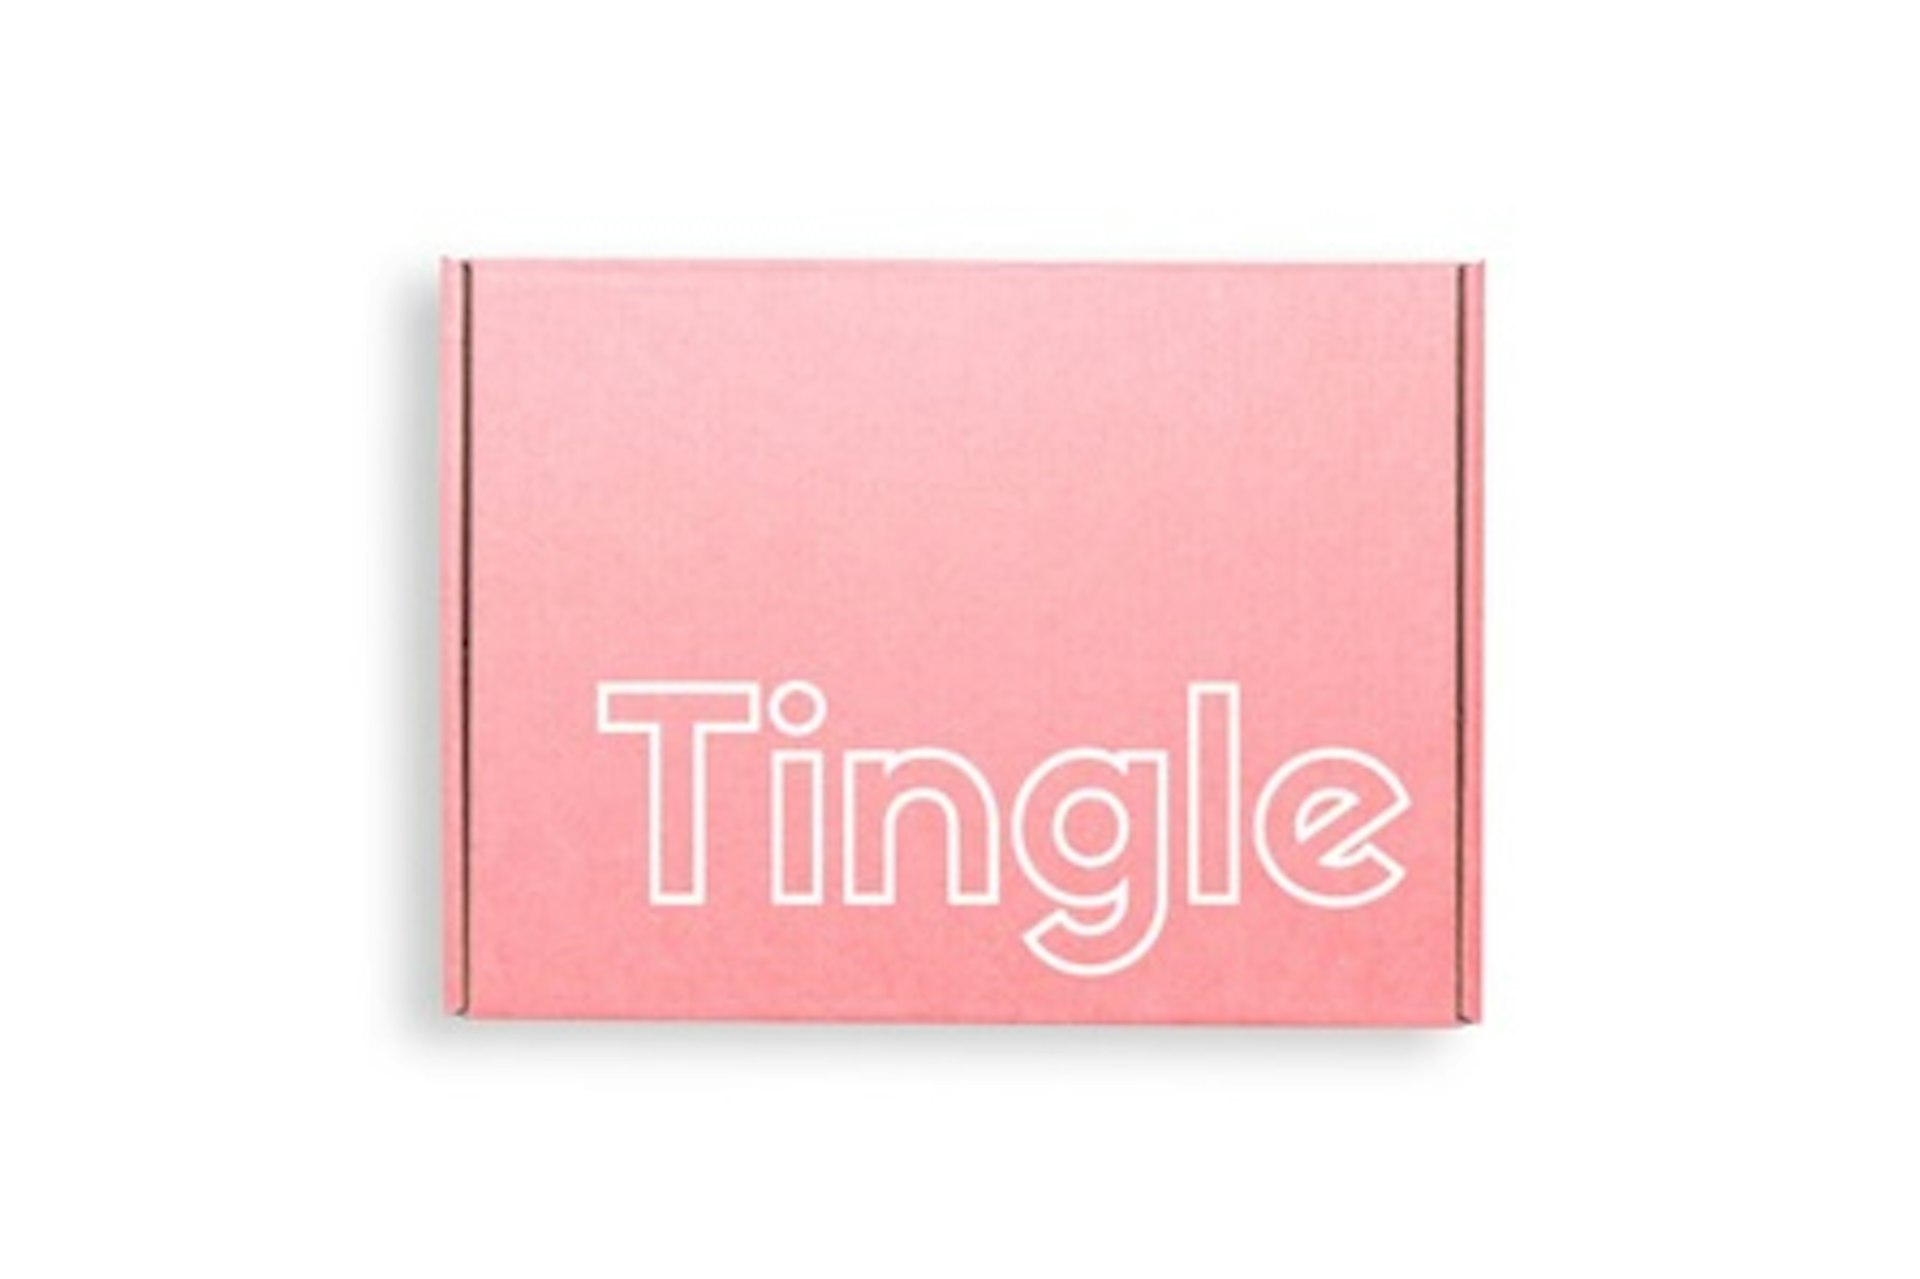 Six Month Self-Care Treat Box Subscription with Tingle 4